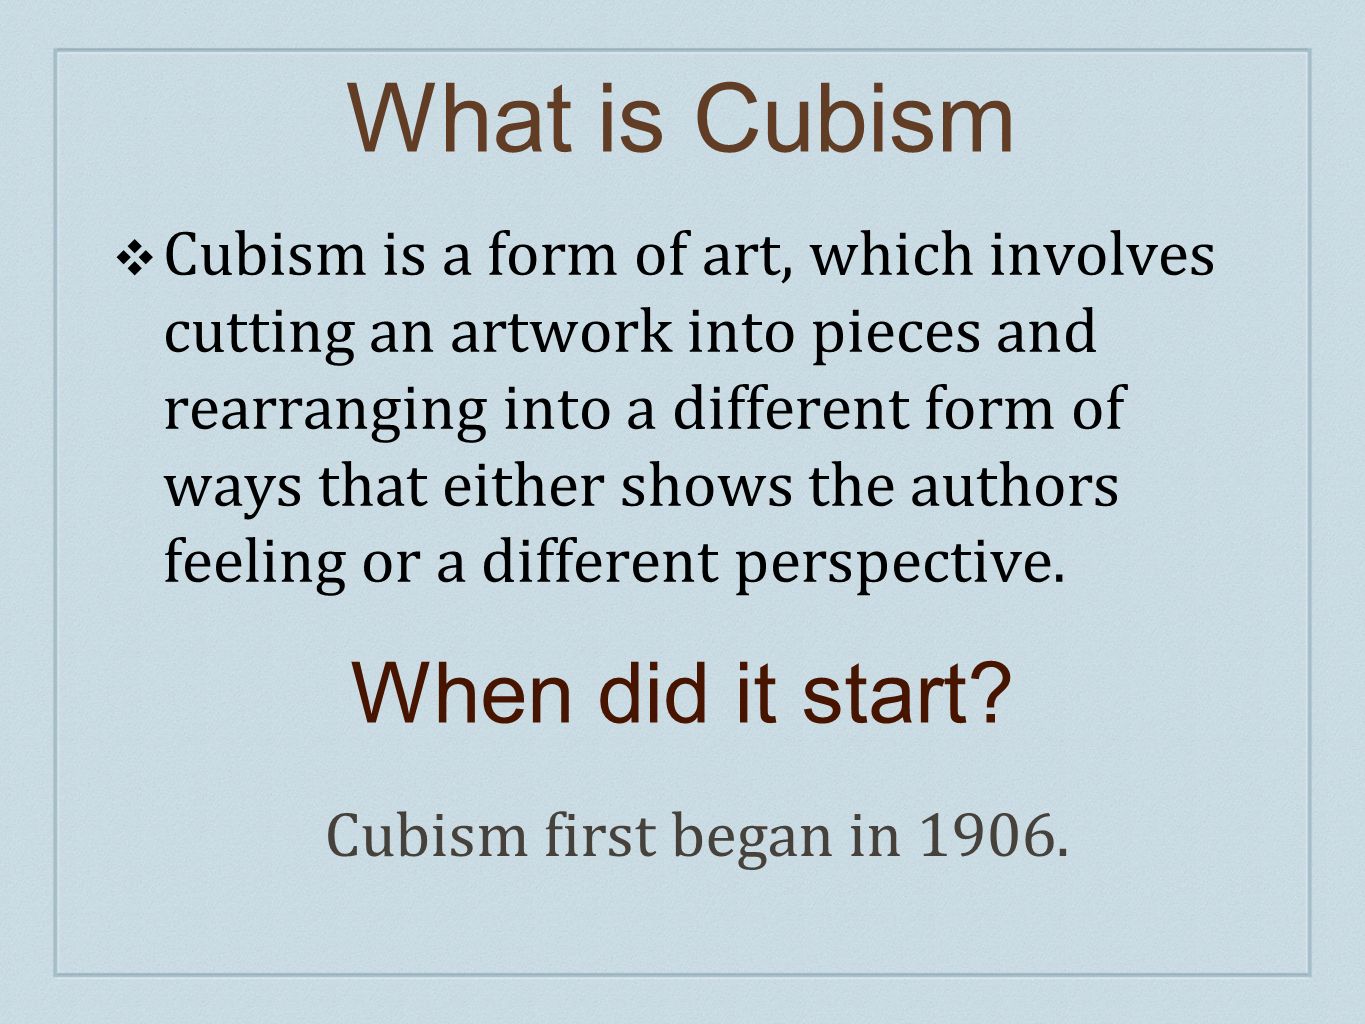 What is Cubism ❖ Cubism is a form of art, which involves cutting an artwork into pieces and rearranging into a different form of ways that either shows the authors feeling or a different perspective.